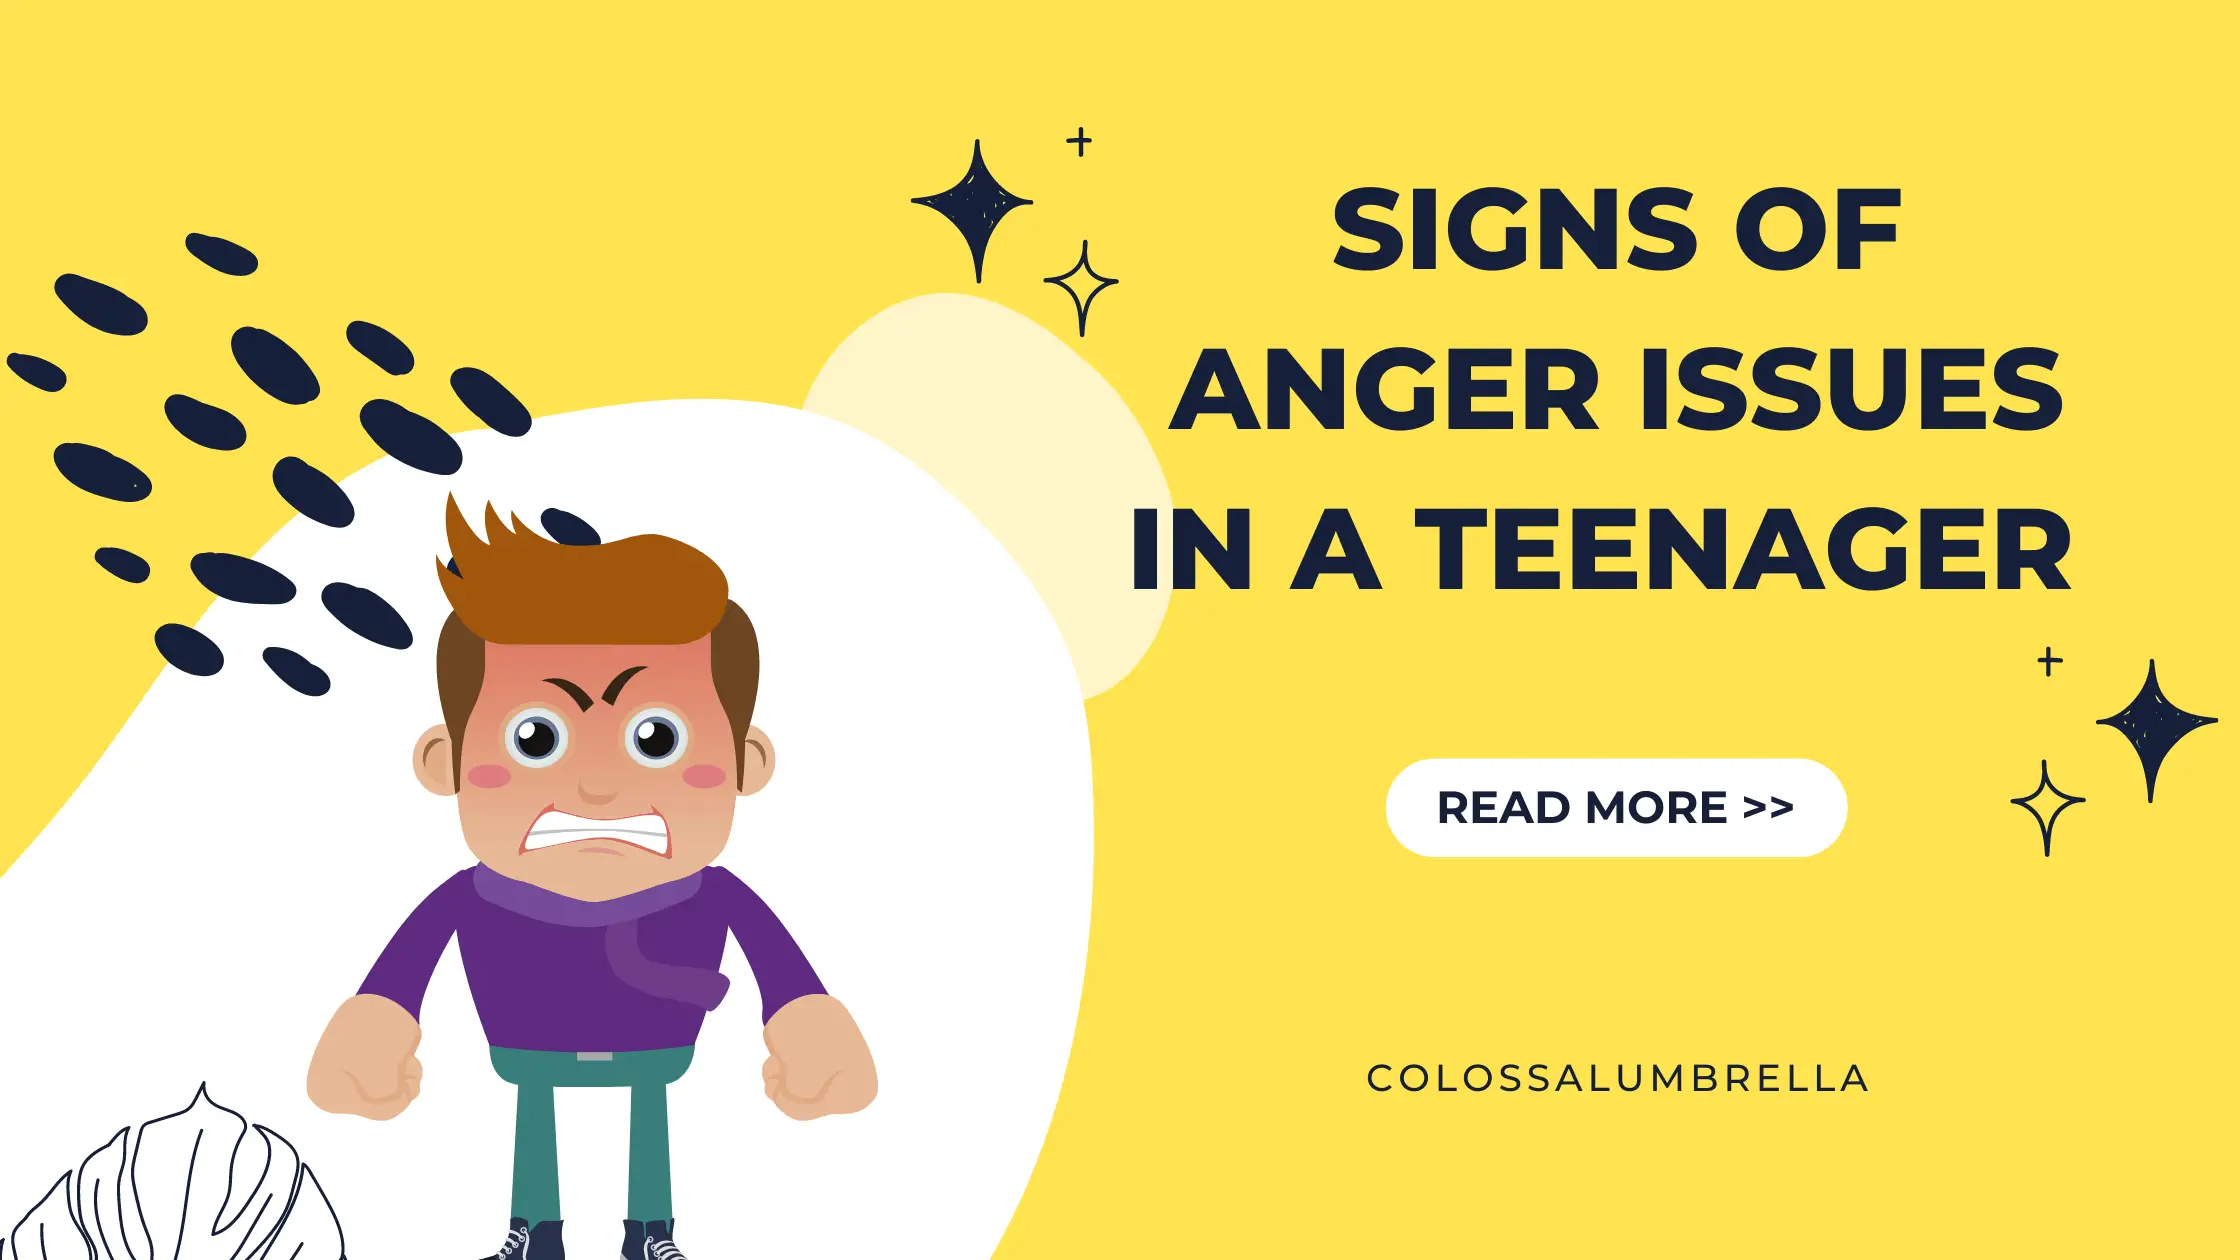 7 Signs of anger issues in a teenager and how to deal with them